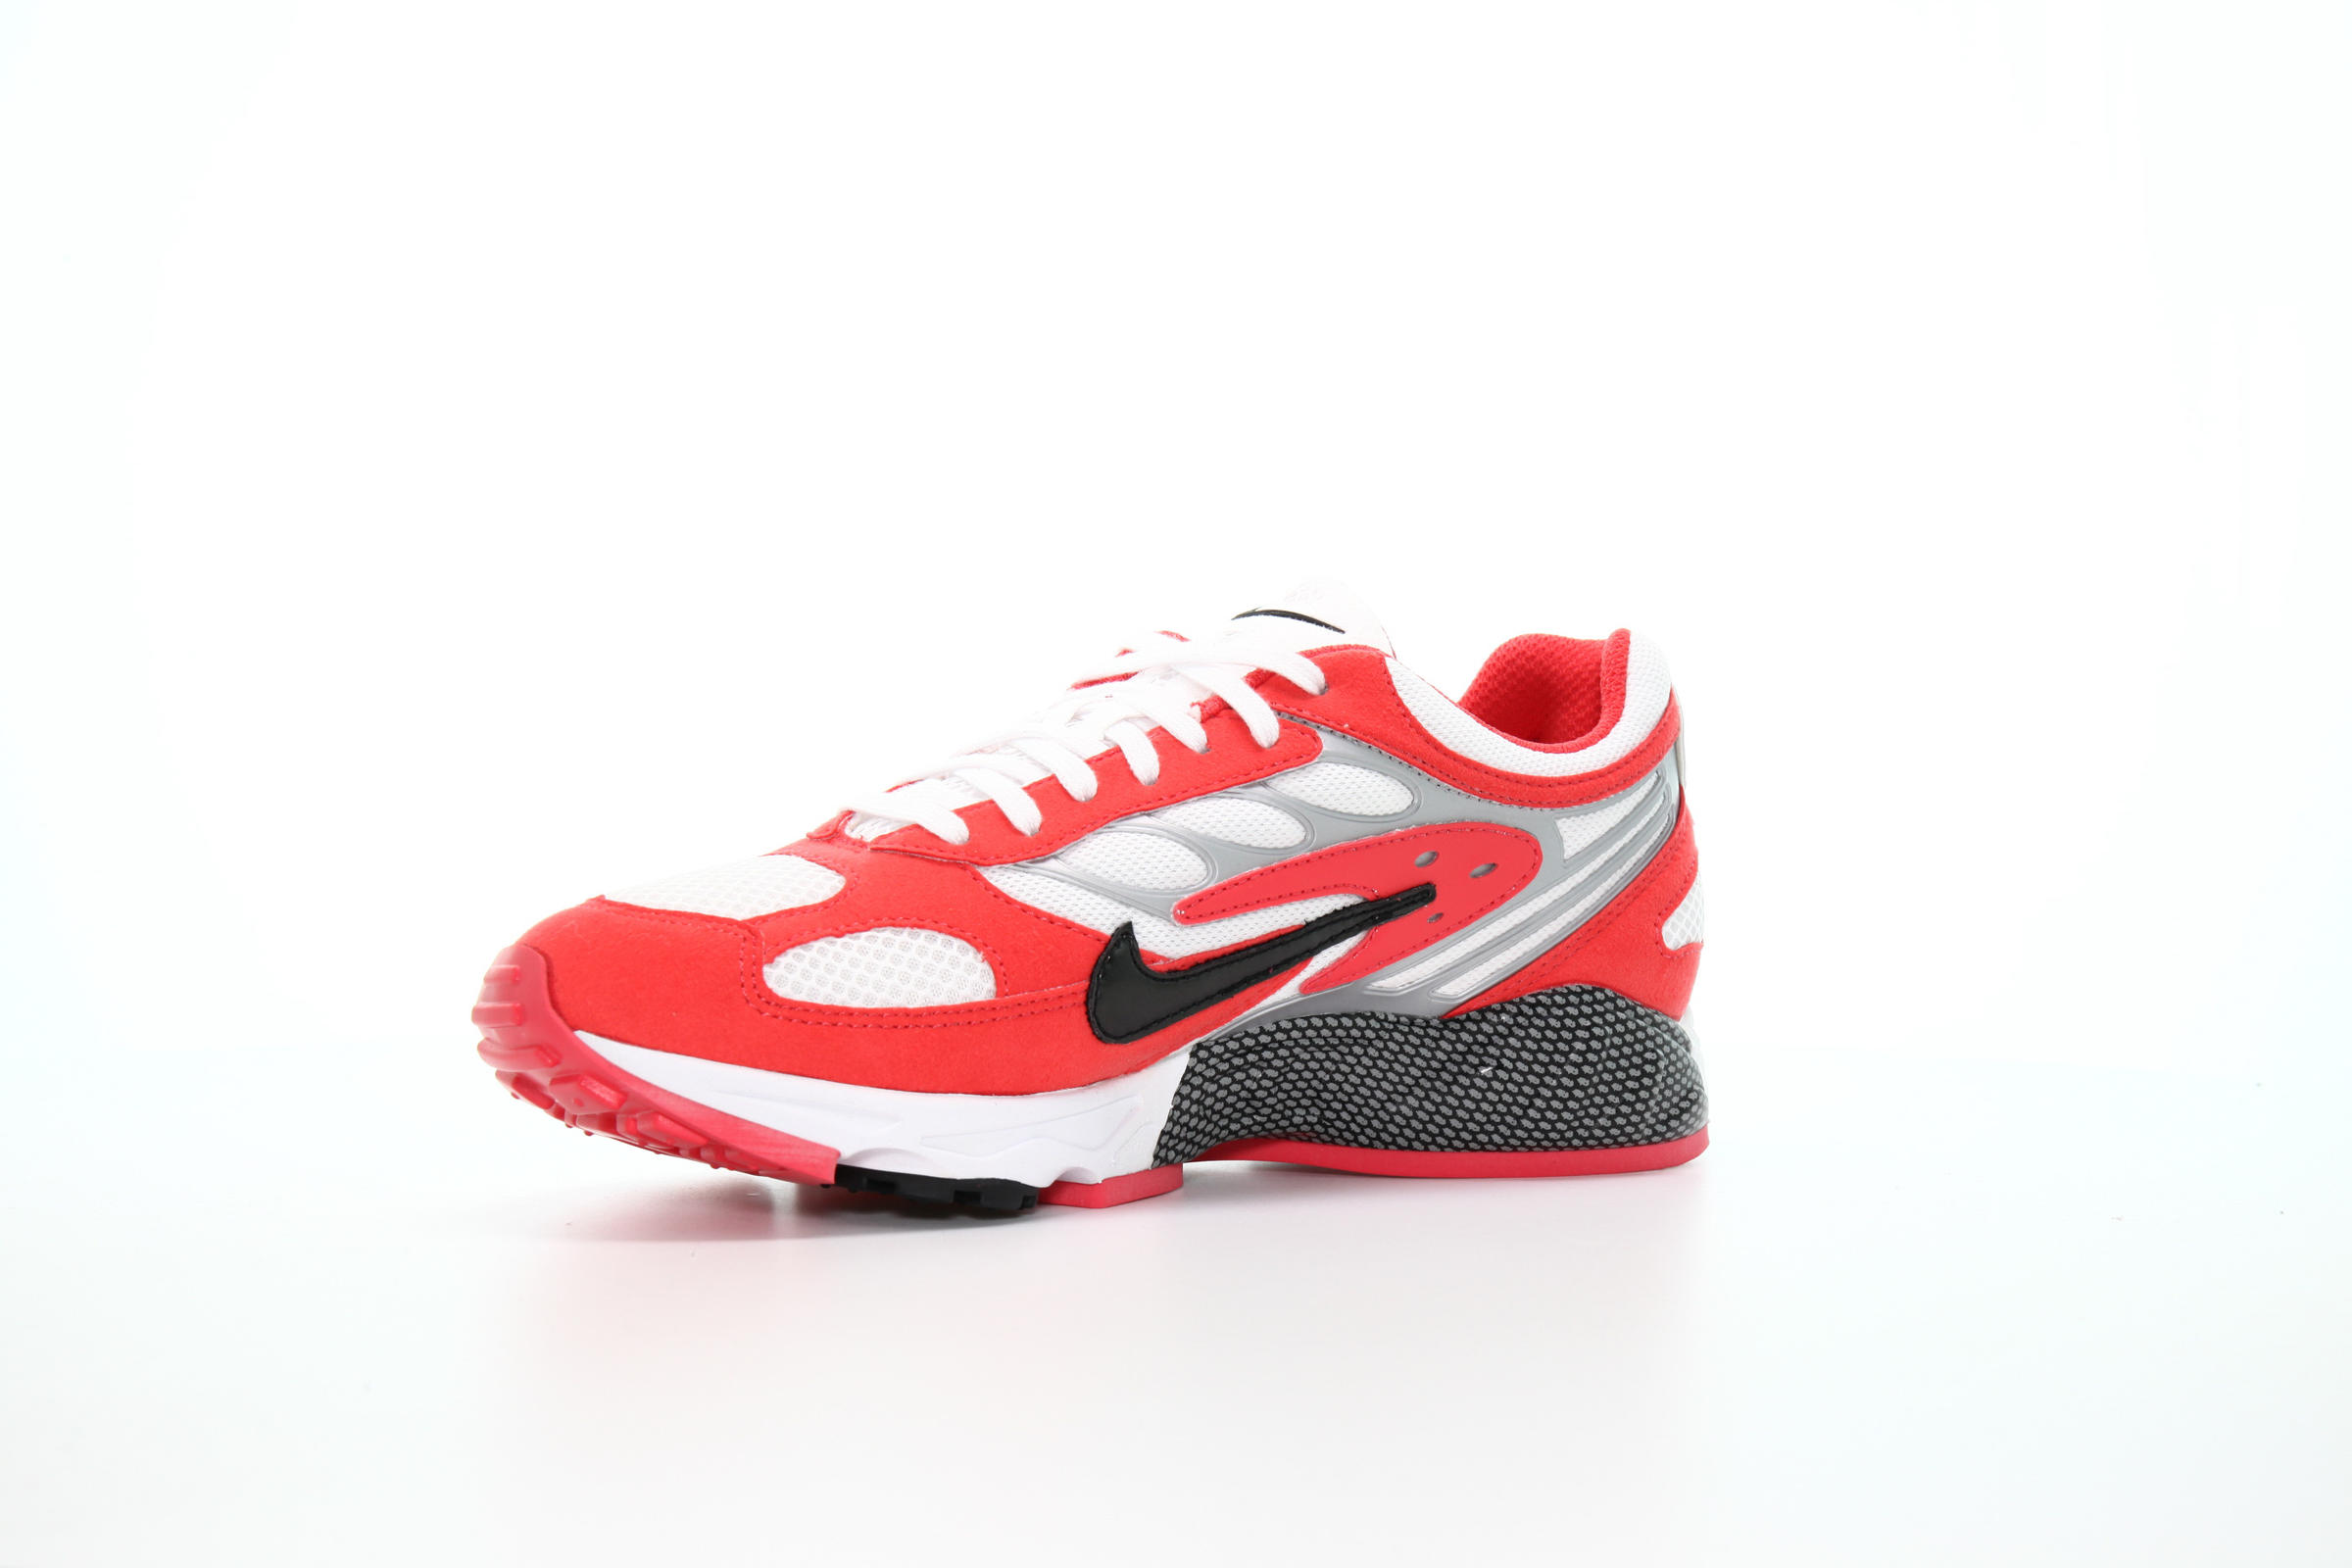 Nike AIR GHOST RACER "TRACK RED"